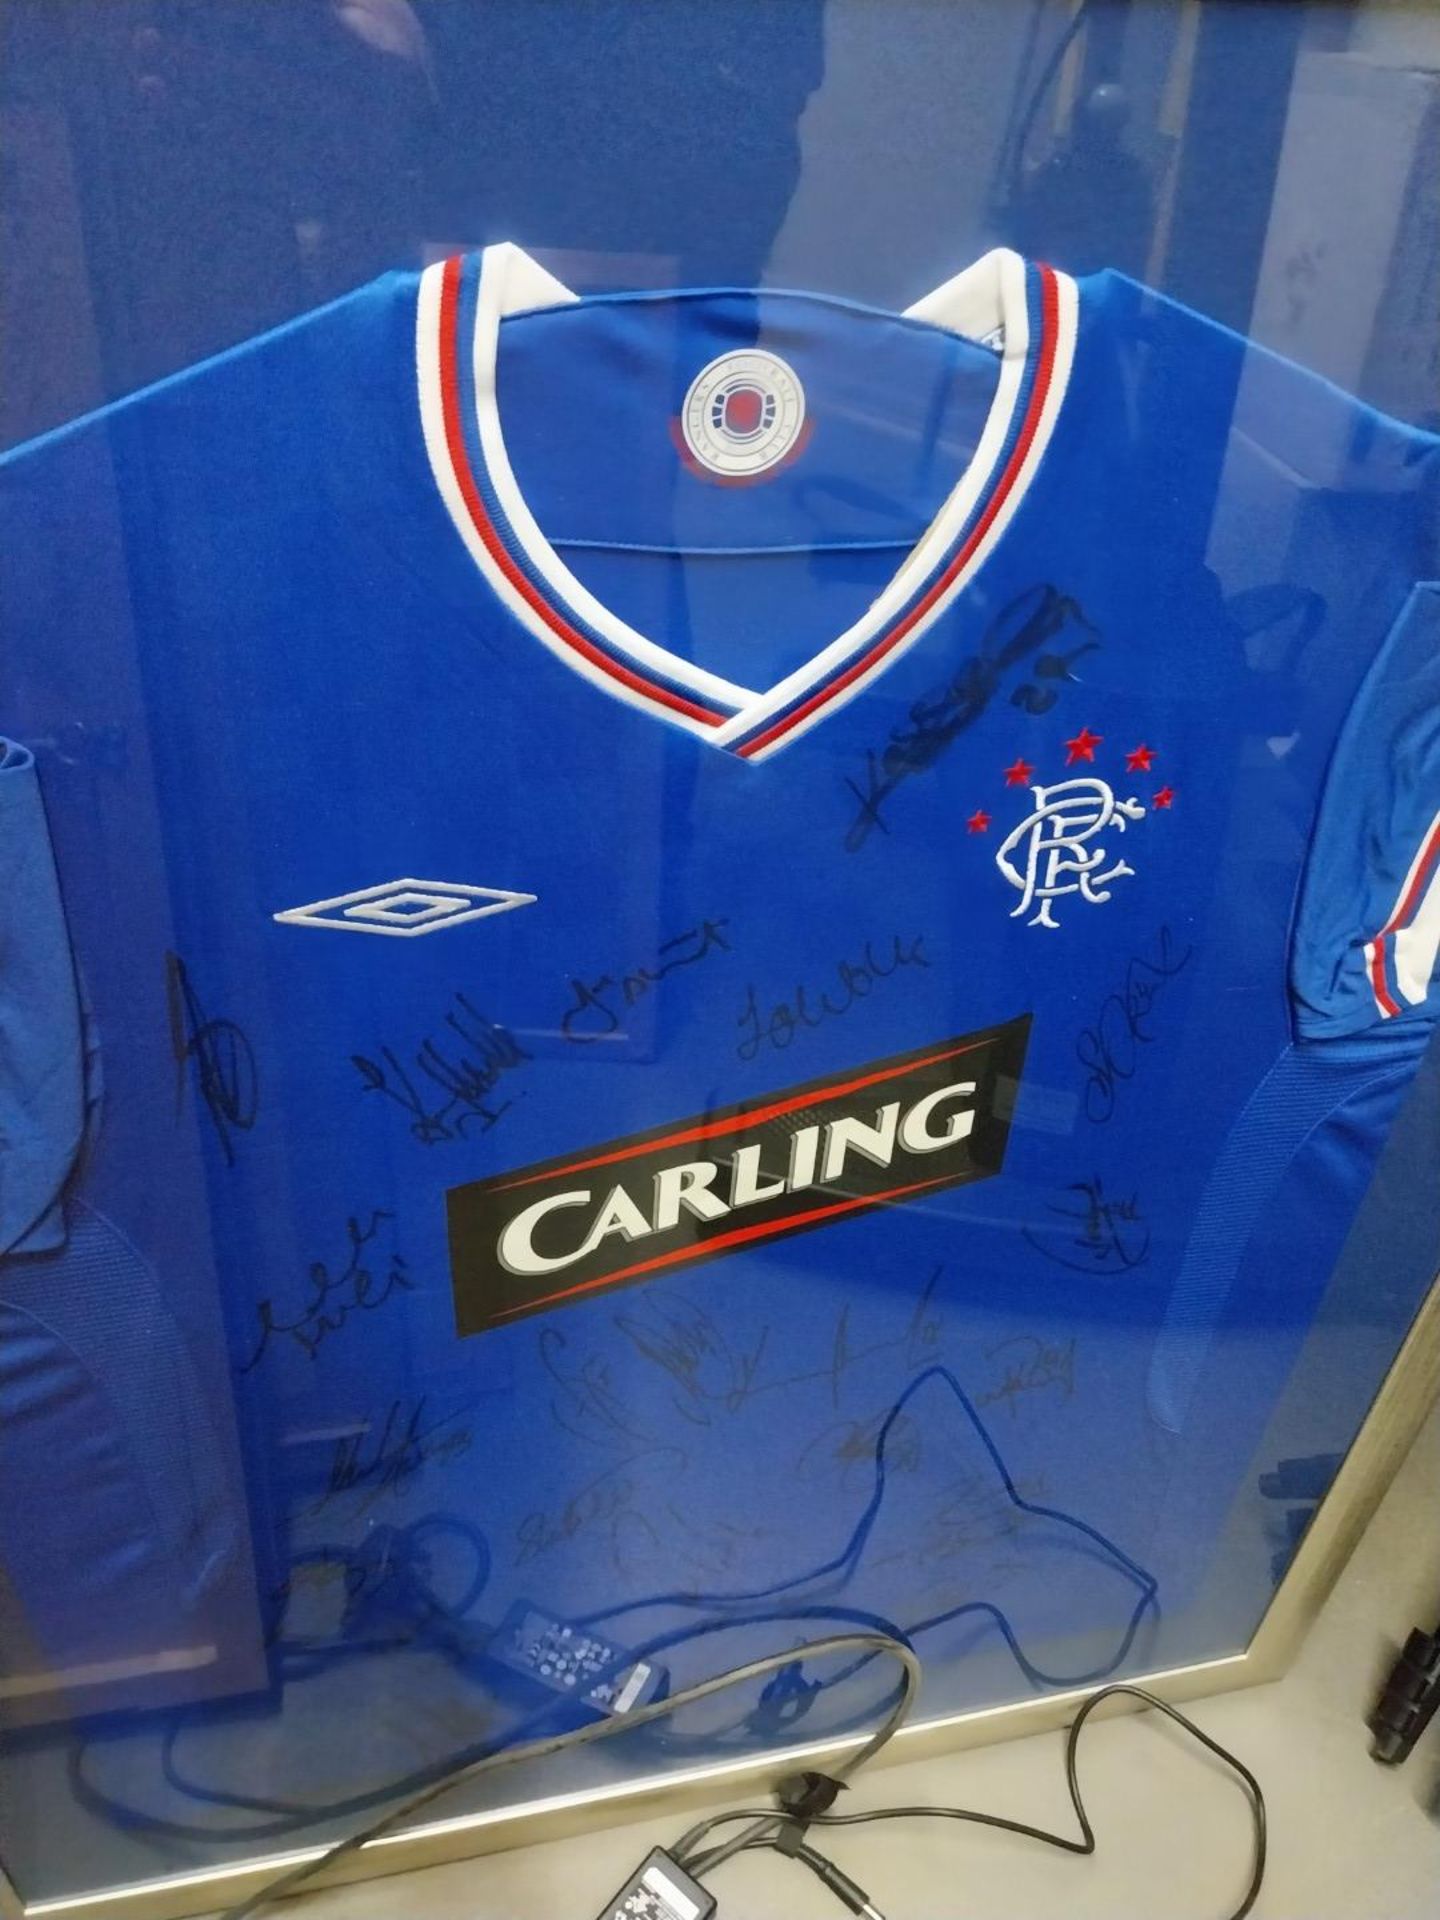 Signed Glasgow Rangers Shirt with Carling sponsor (located in Leeds) - Image 2 of 2